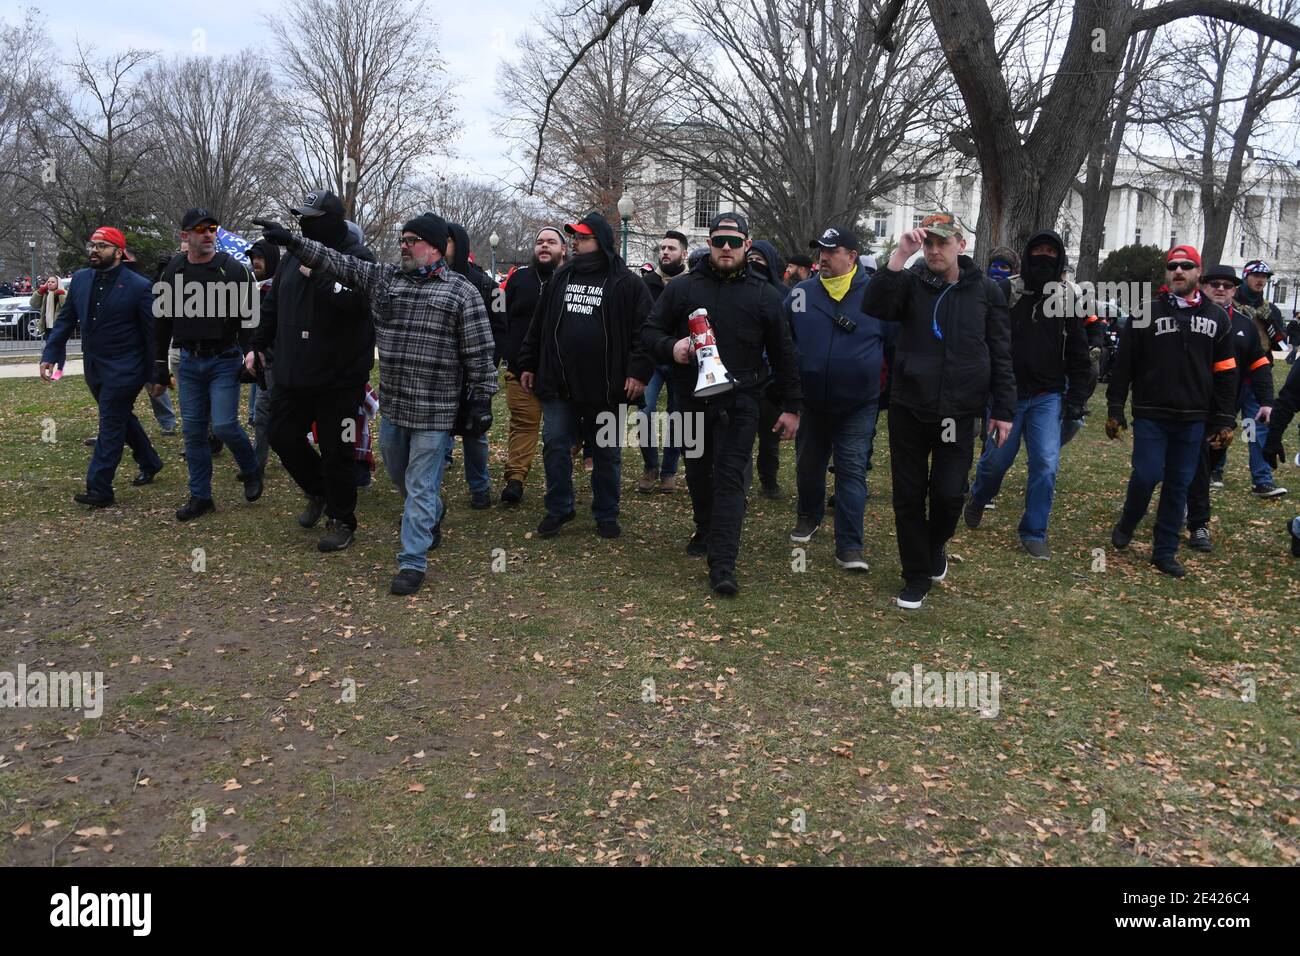 January 6, 2021, Washington, District of Columbia, USA: Proud Boys organizer JOSEPH RANDALL BIGGS, 37, (center pointing) walks with other protestors and President Trump supporters prior to storming the U.S. Capitol as the Congress is meeting in a joint session to count each state's electoral votes. The Capitol has been locked down and staffers were evacuated from two congressional buildings as crowds tried to breach them. Dozens of protesters, many wearing red hats and holding 'Trump' flags, could be seen walking through the Capitol's Statuary Hall. (Credit Image: © Christy Bowe/ZUMA Wire) Stock Photo